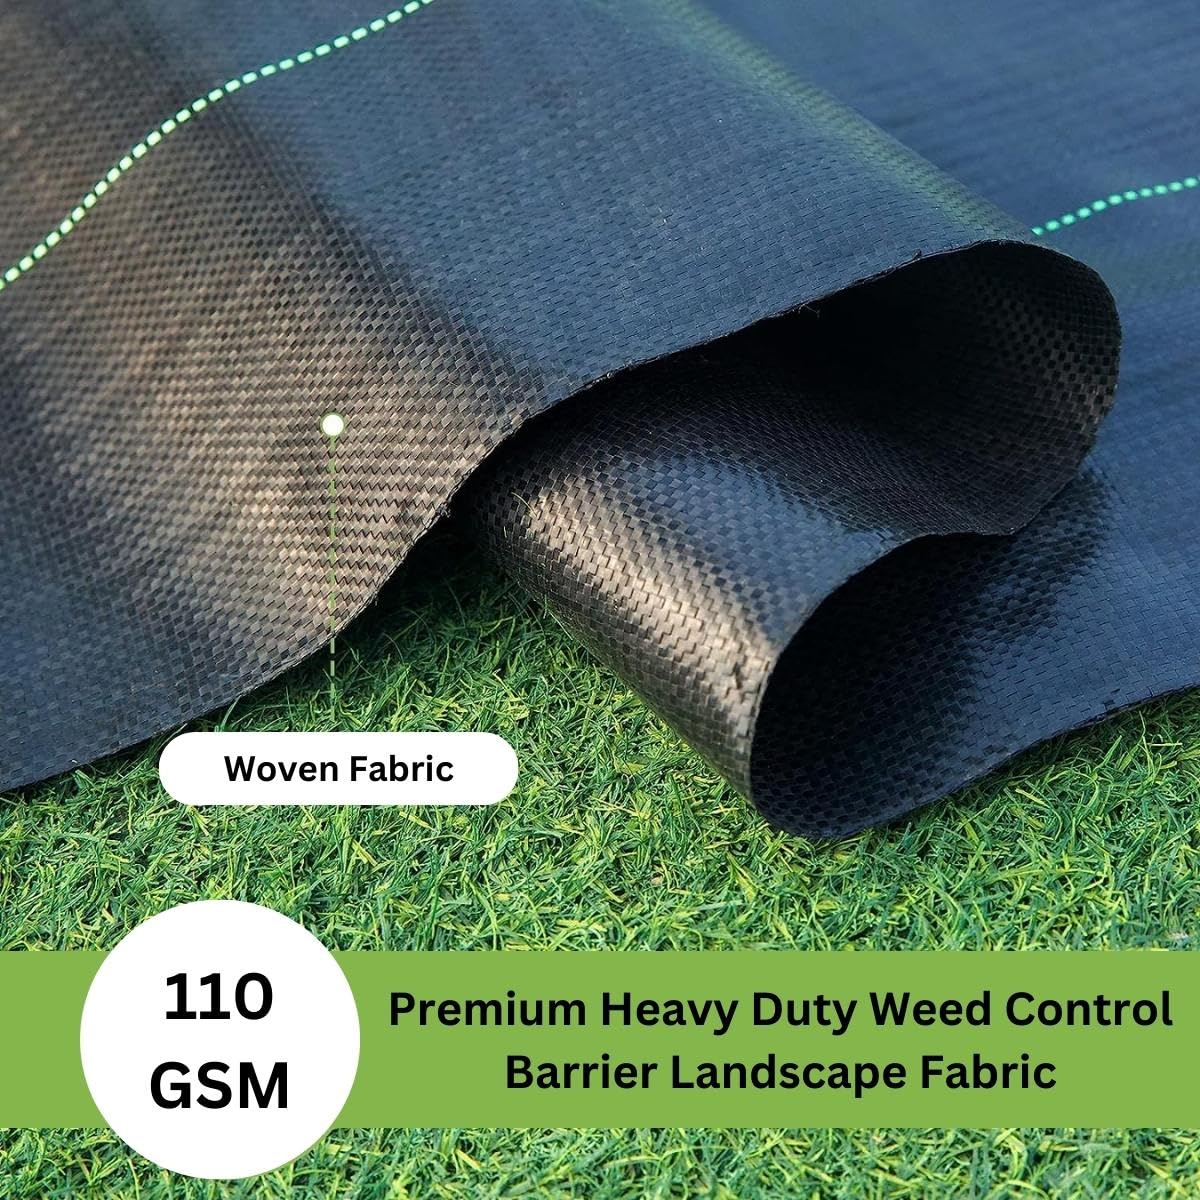 Singhal Premium Garden Weed Control Barrier Sheet Mat 2 Meter x 10 Meter, Landscape Fabric 110 GSM Heavy Duty Weed Block Gardening Mat for Gardens, Agriculture, Outdoor Projects (Black)